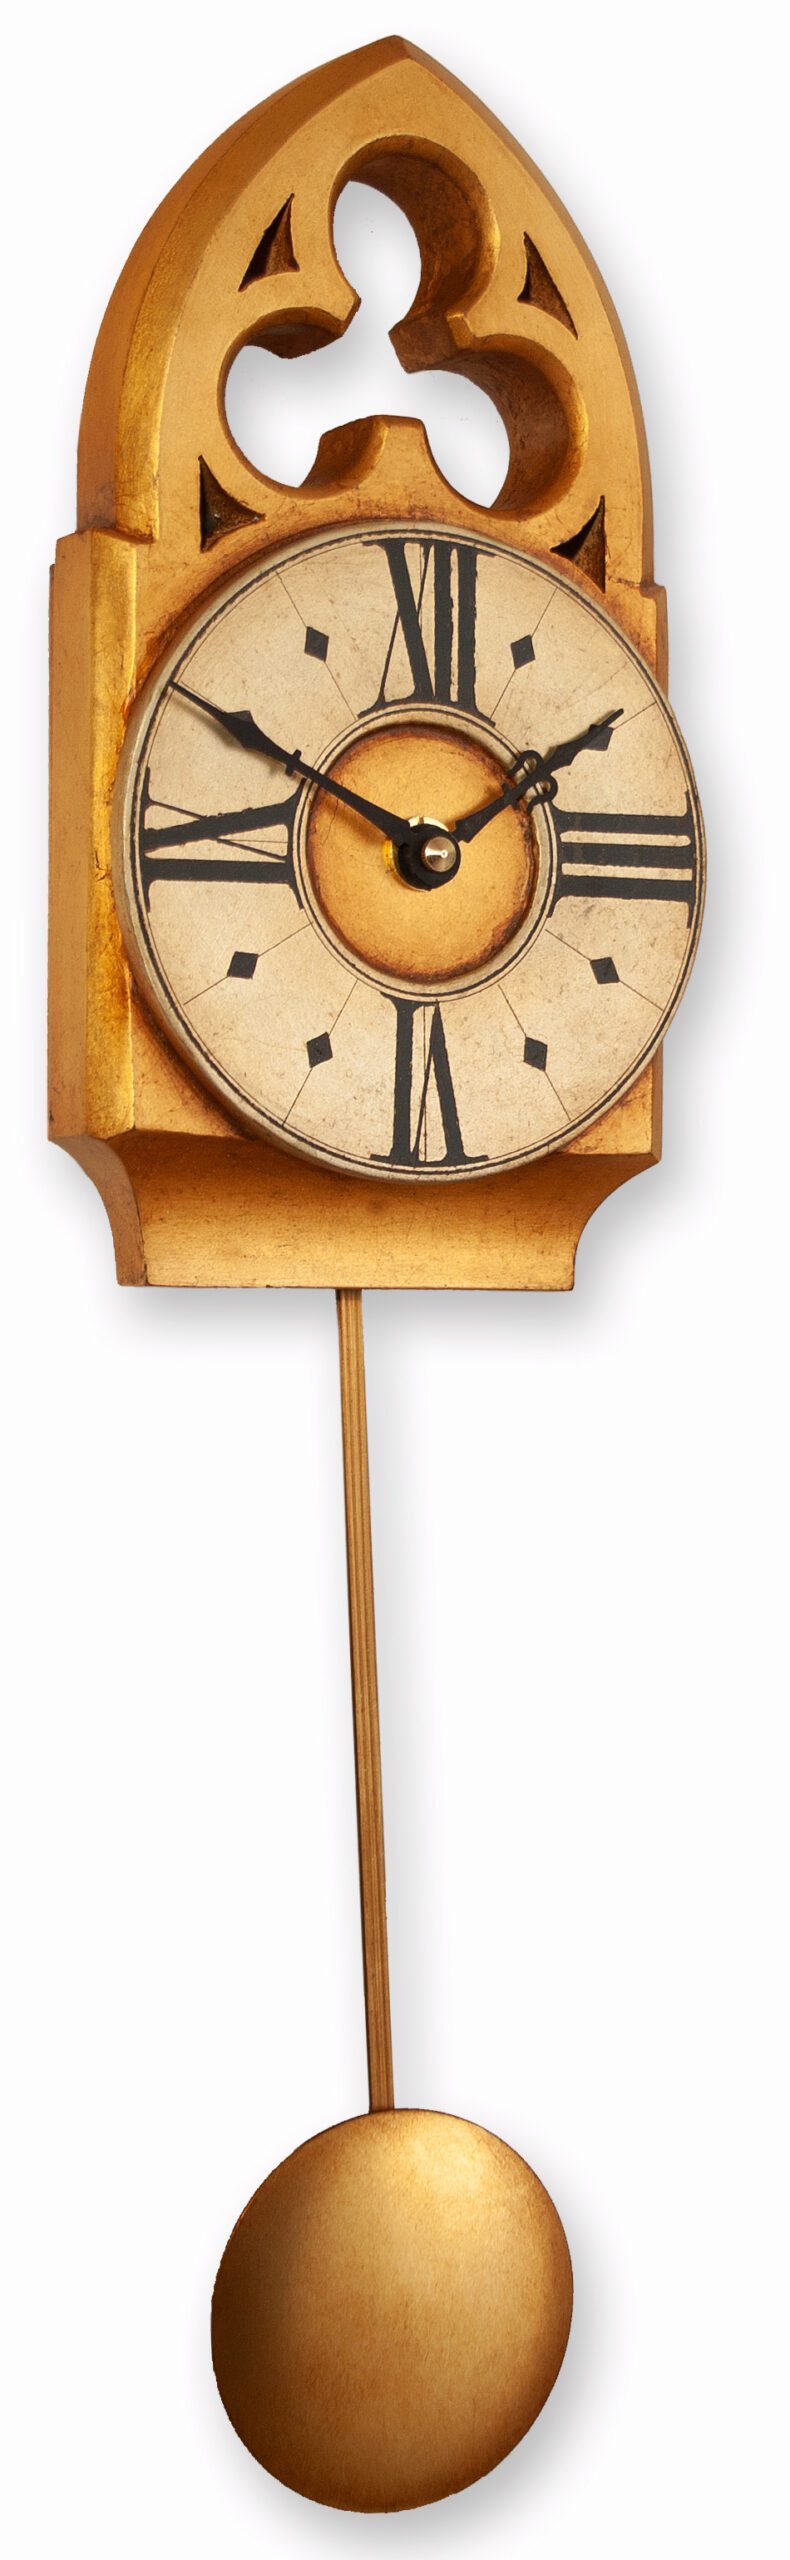 Tiny Gothic Pendulum Clock with trefoil pediment in gold and silver